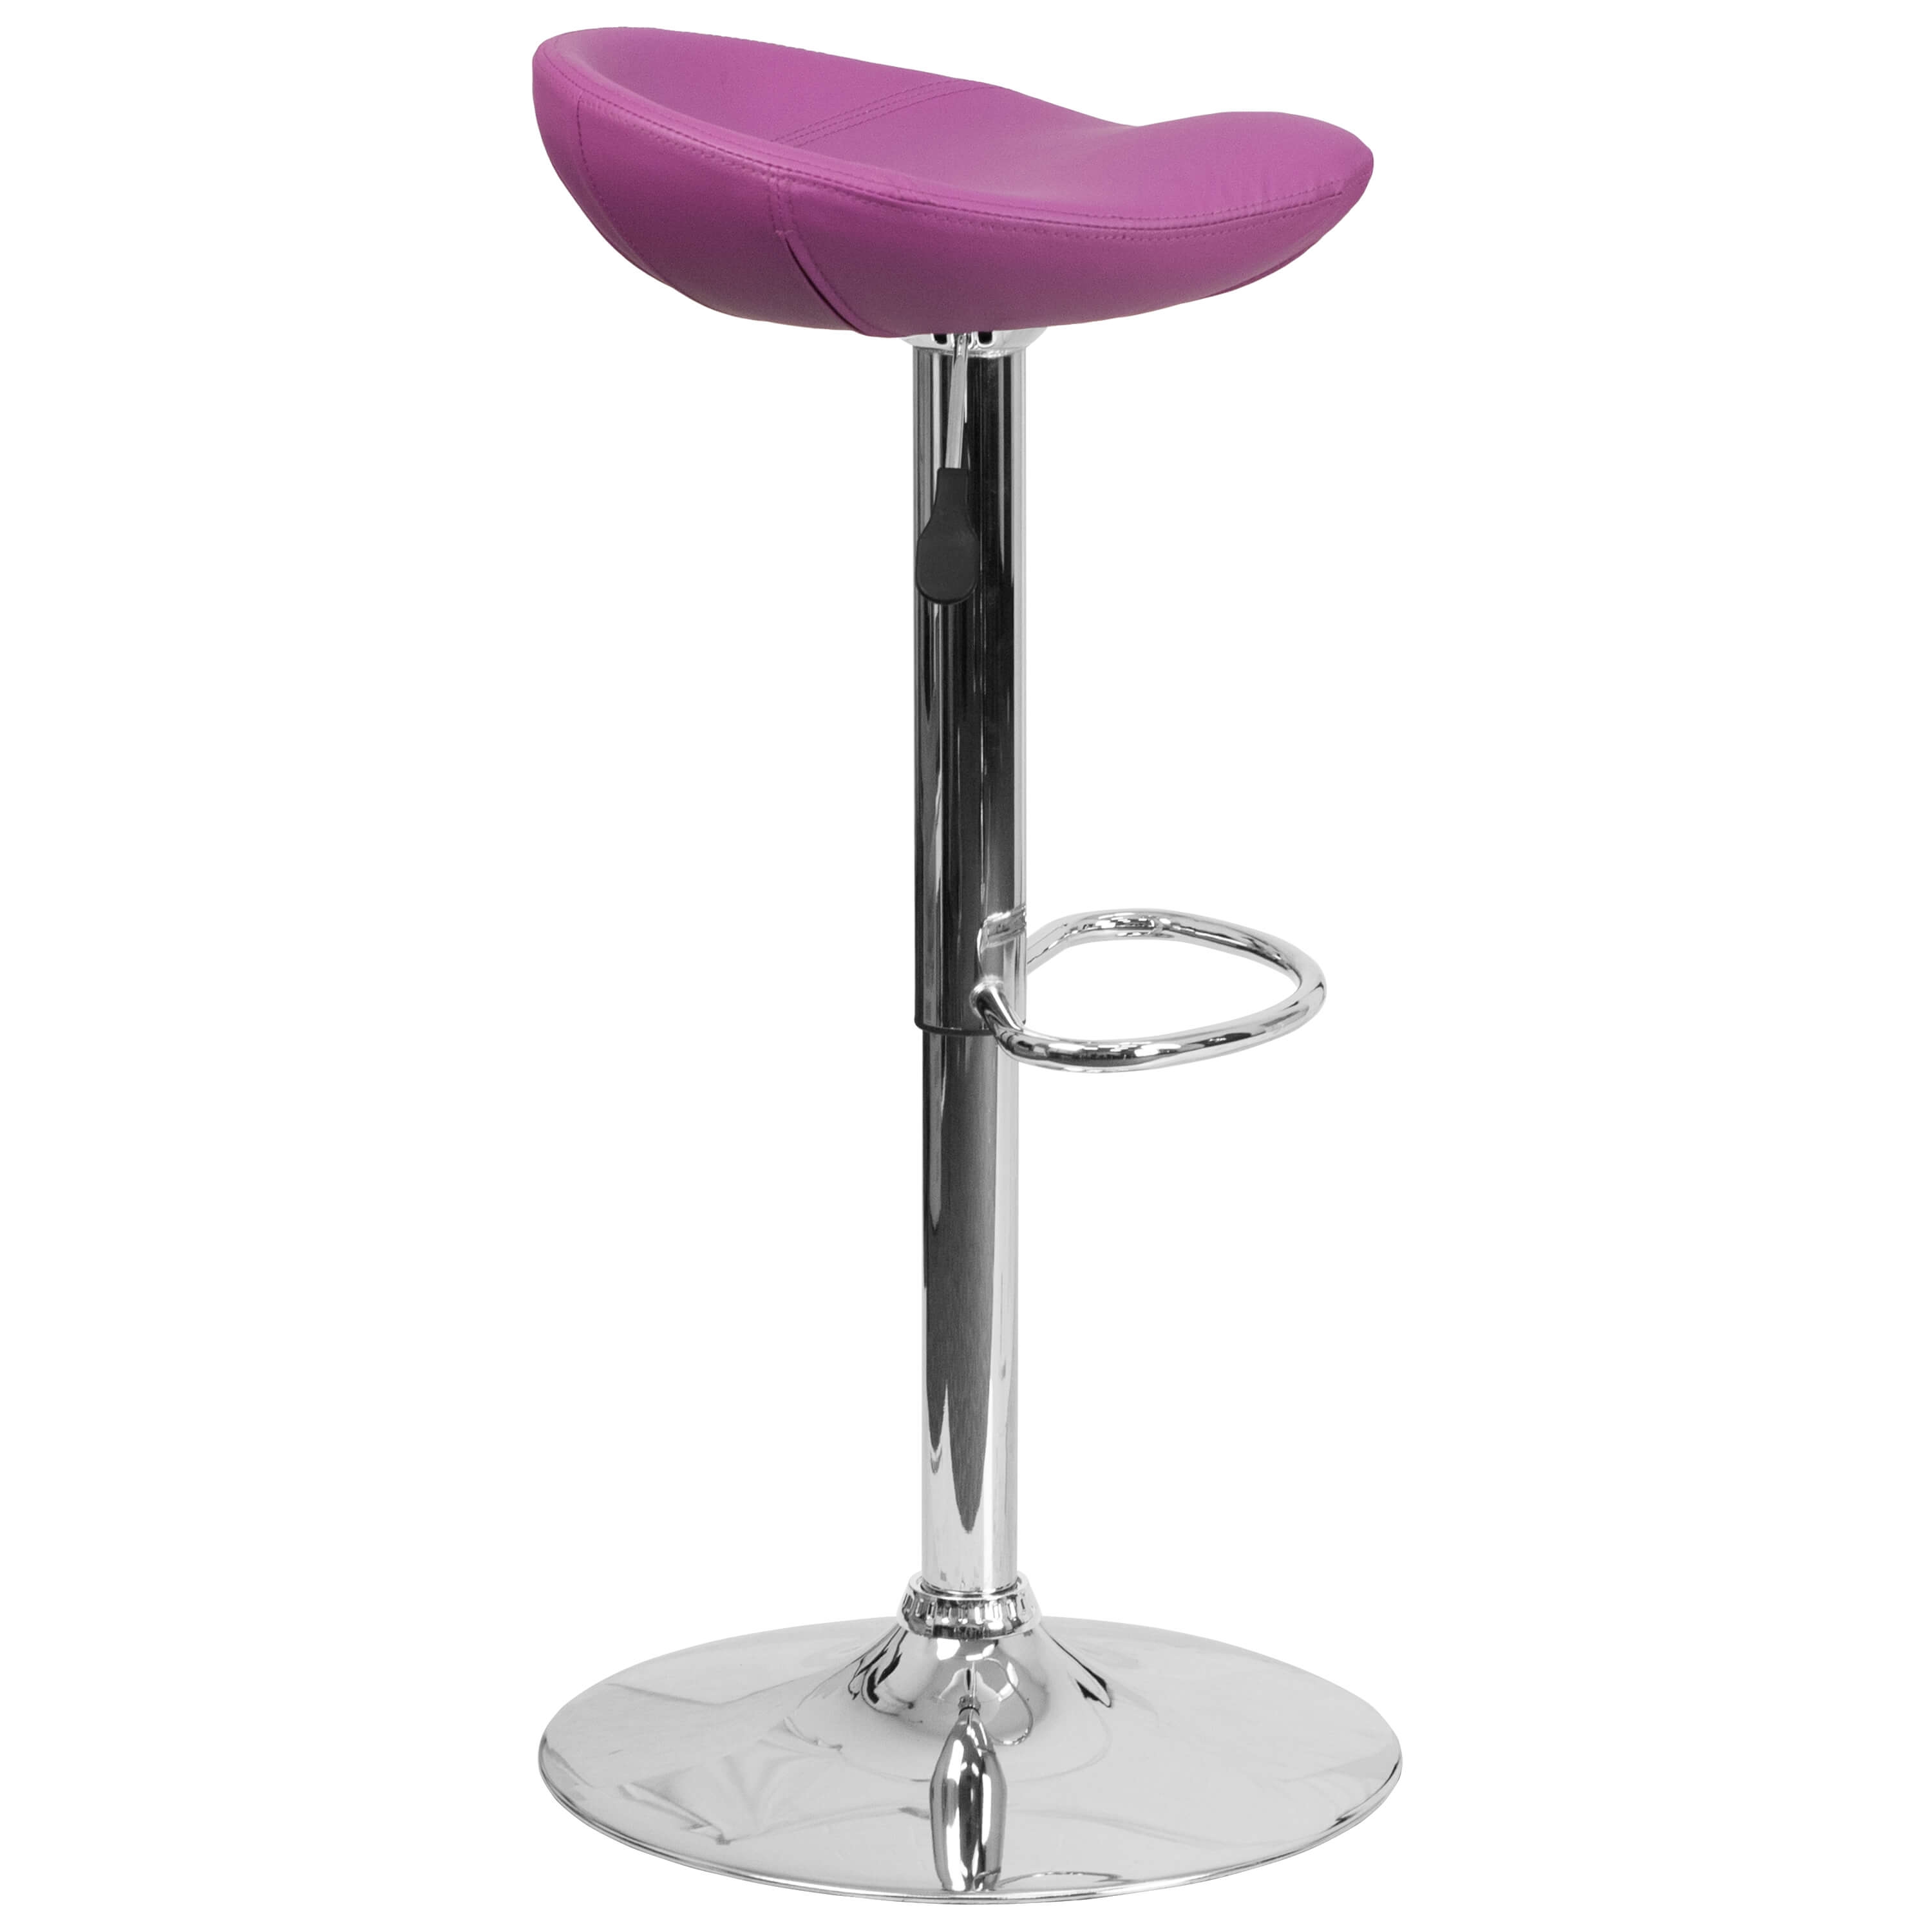 Padded bar stools side view